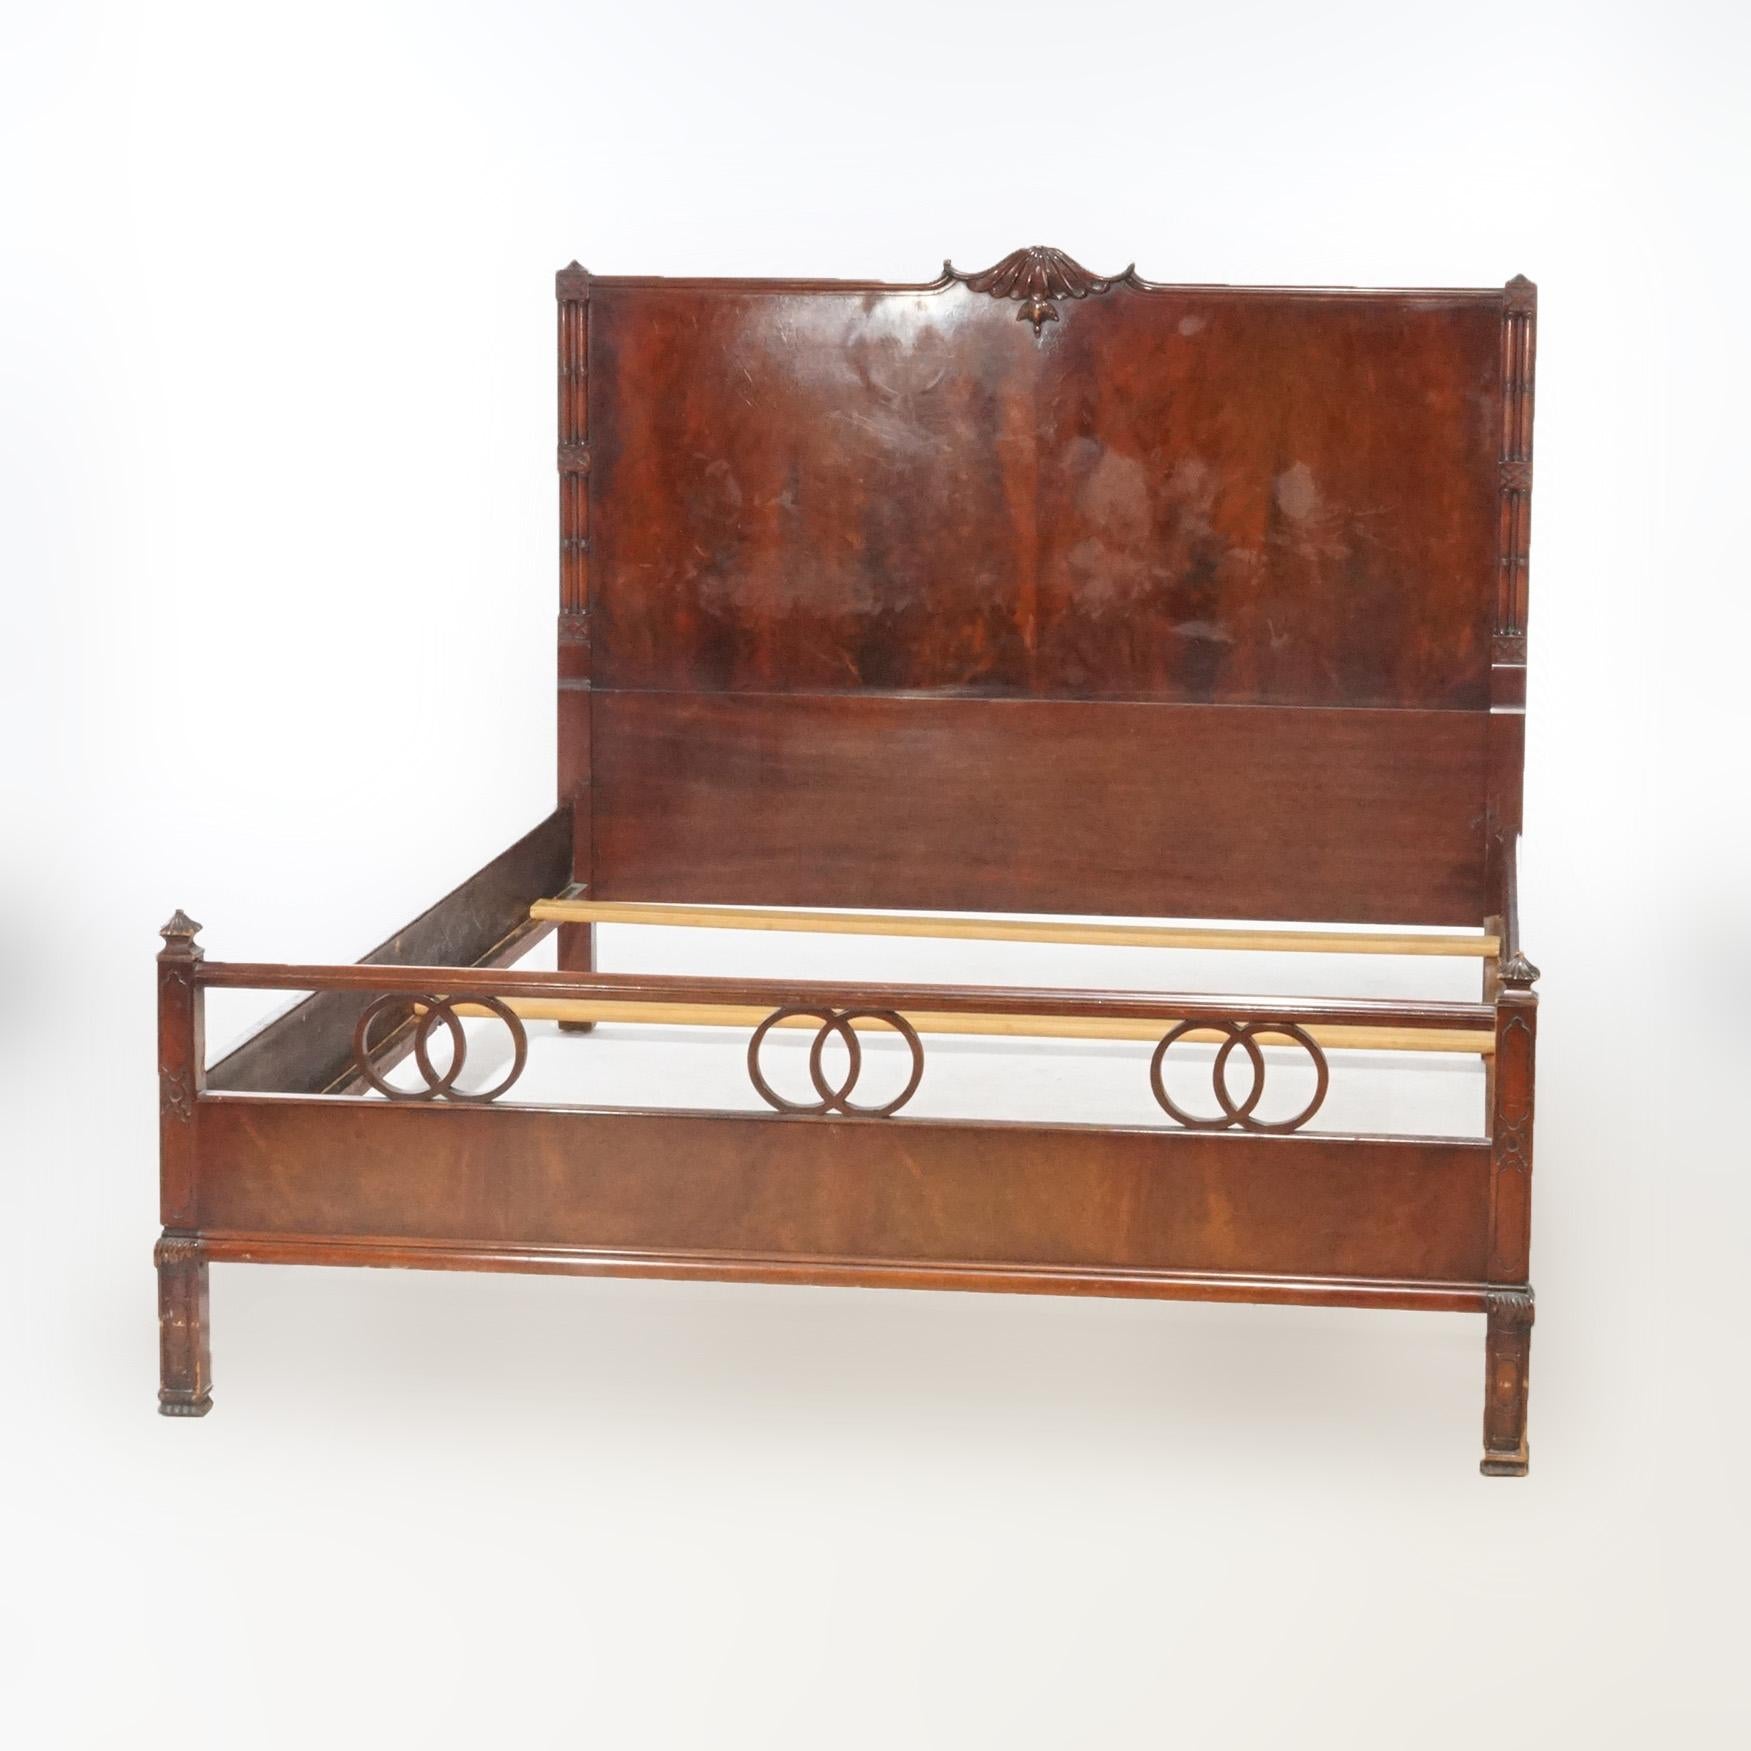 An antique double bed frame offers flame mahogany construction with headboard having carved crest and footboard with circular elements, c1930

 Measures - Headboard 46.5